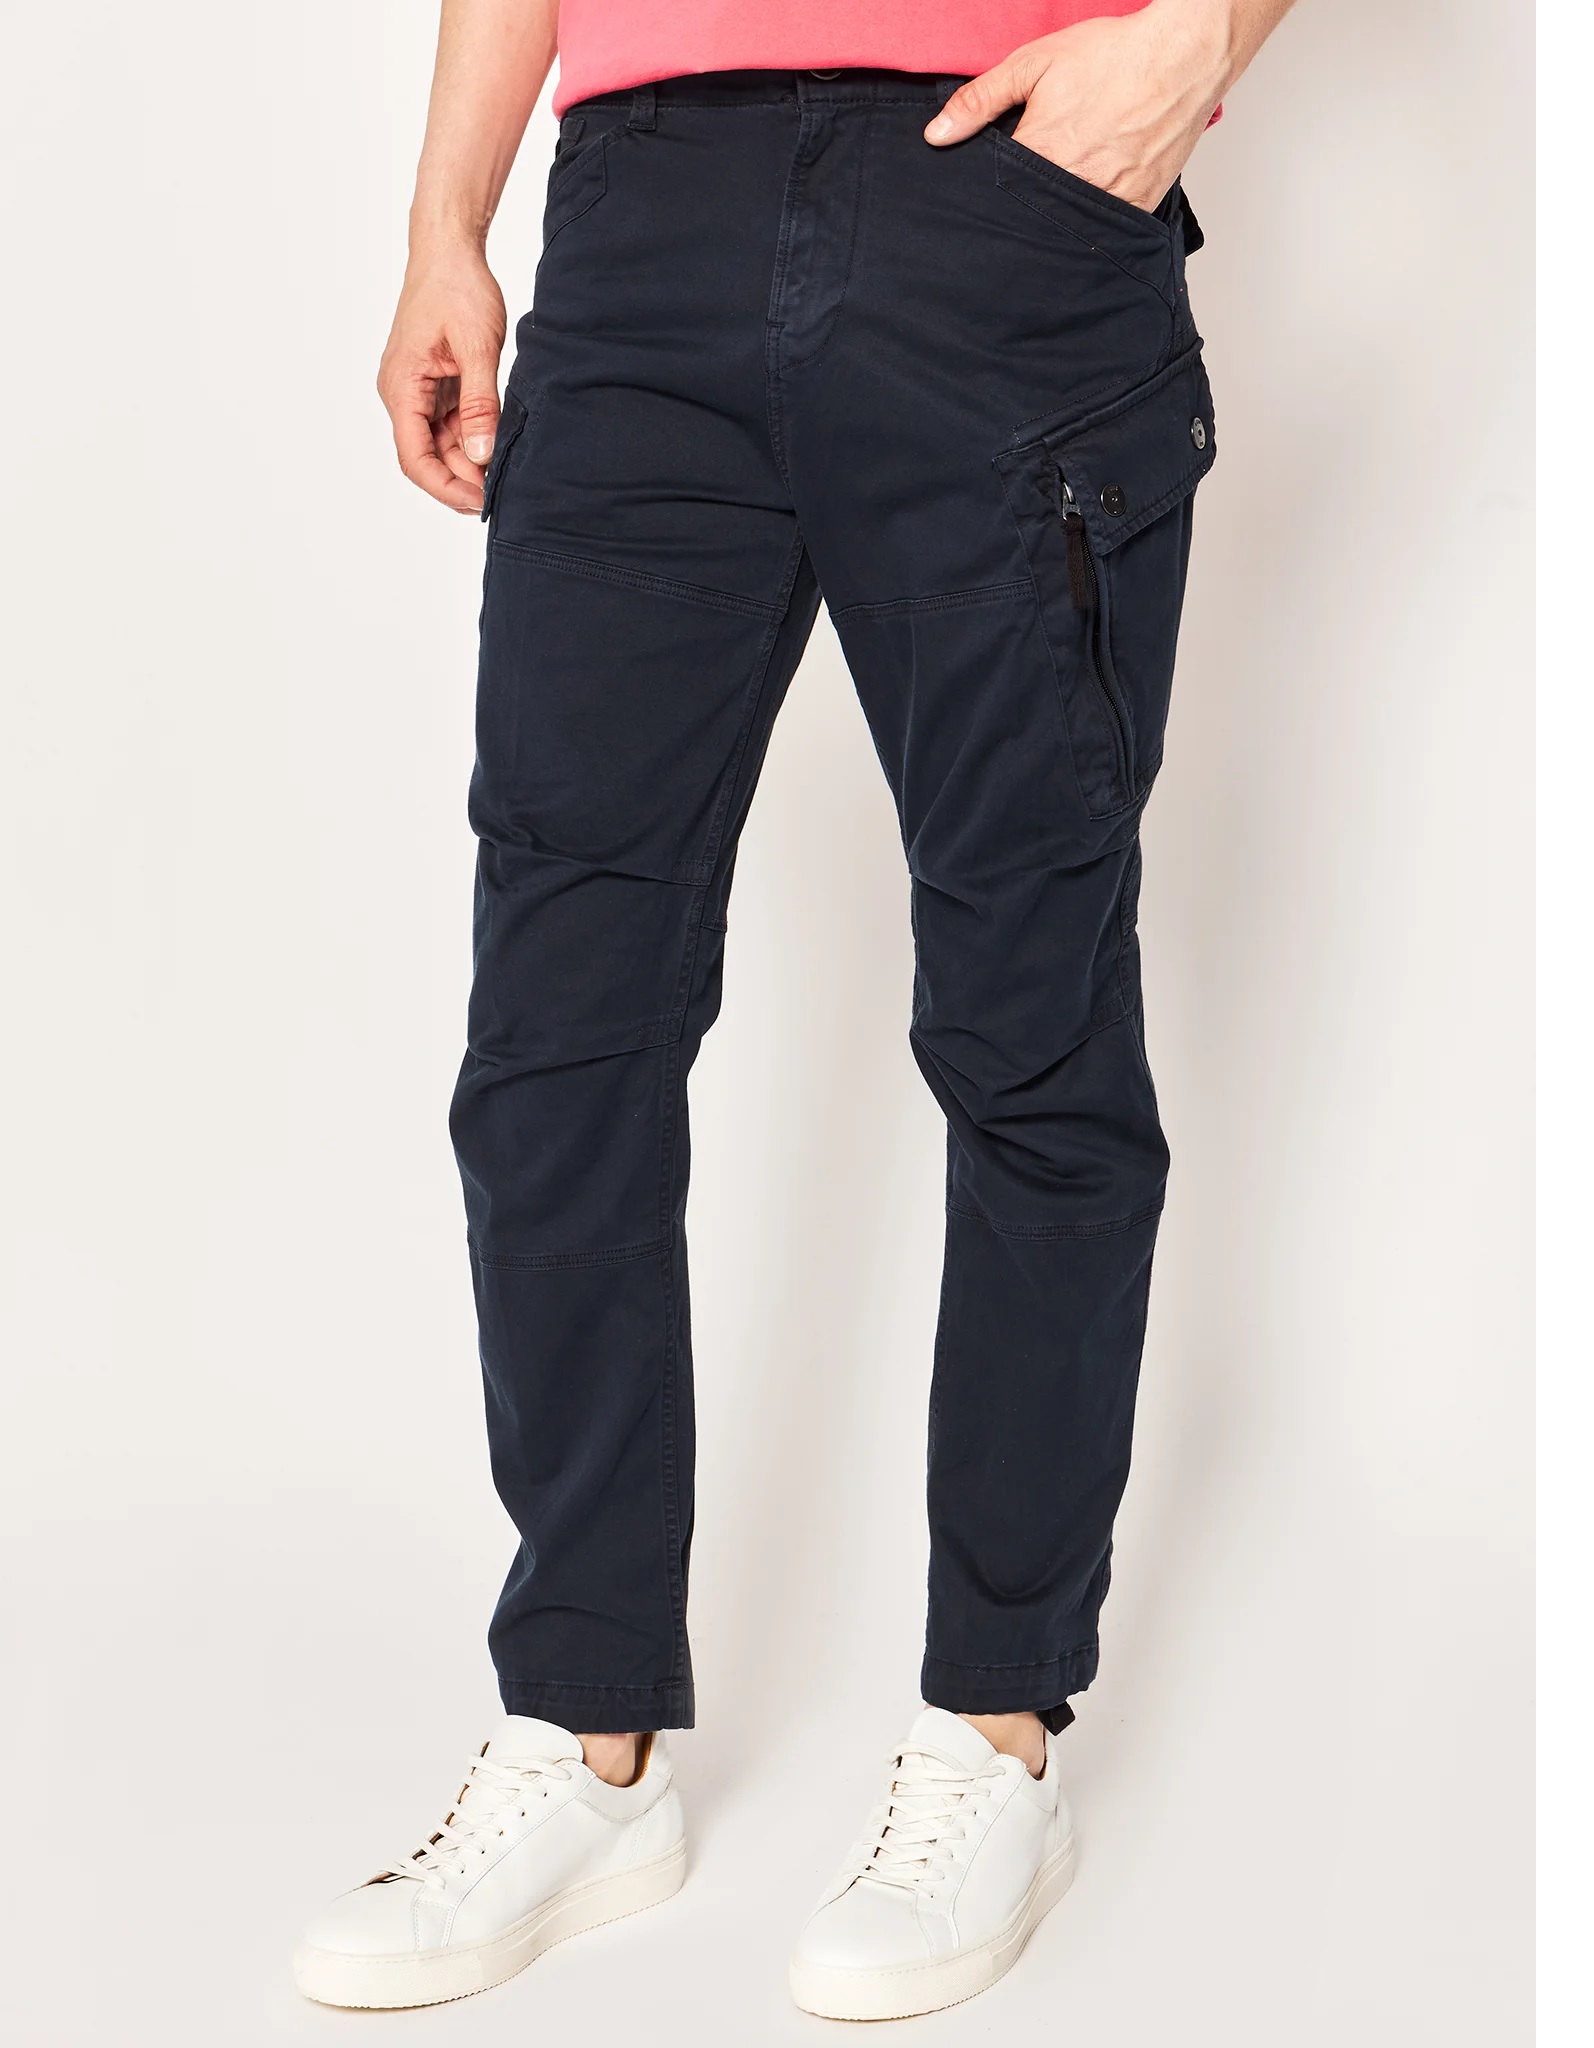 G-STAR RAW ROXIC TAPERED CARGO - G-10 Exclusive Wear